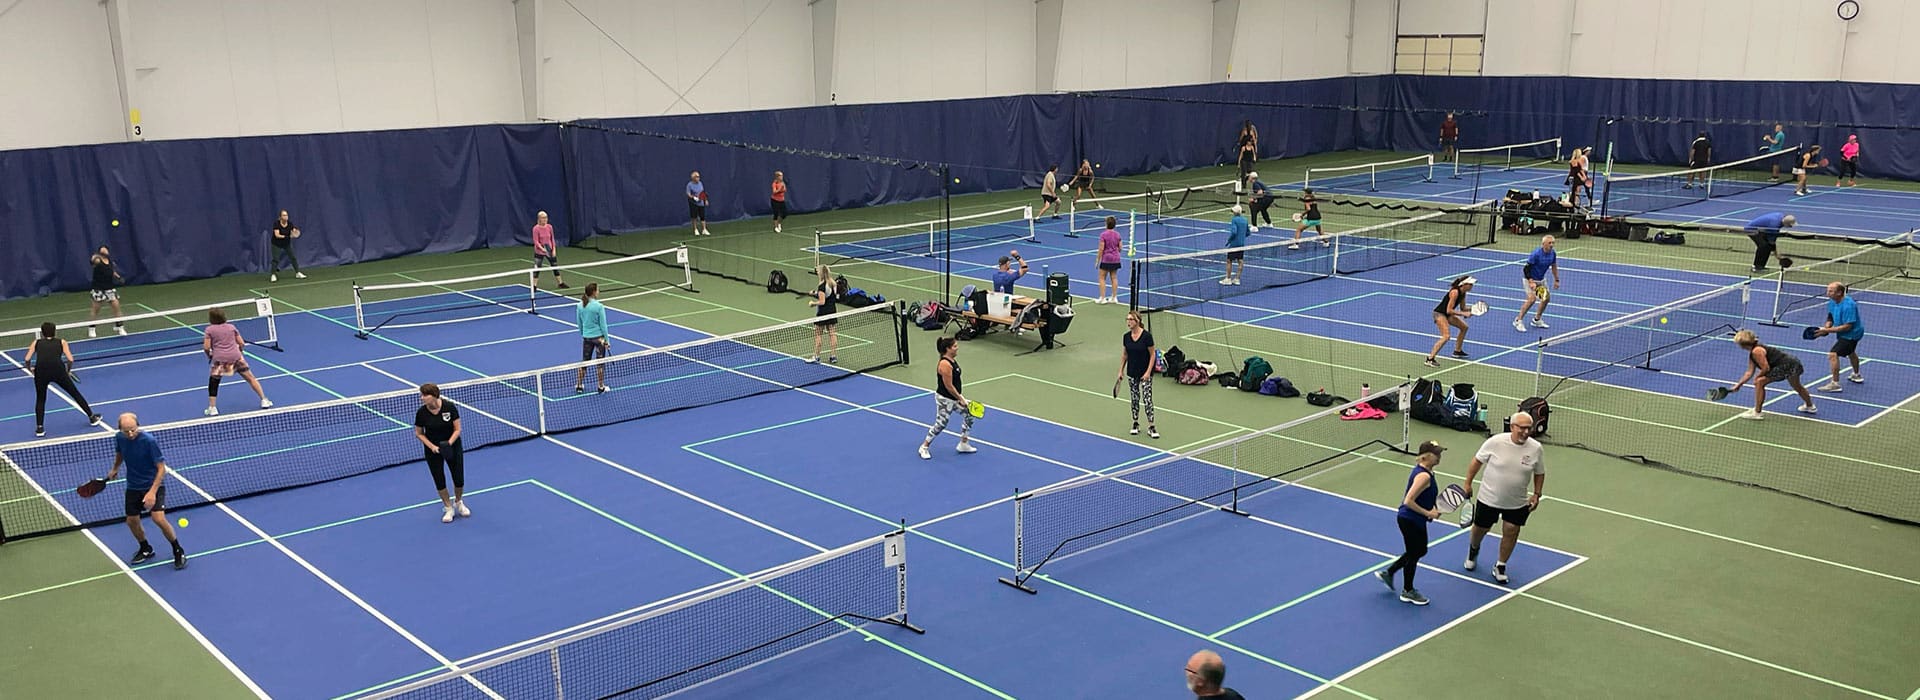 People playing pickleball at Oxford Athletic Club